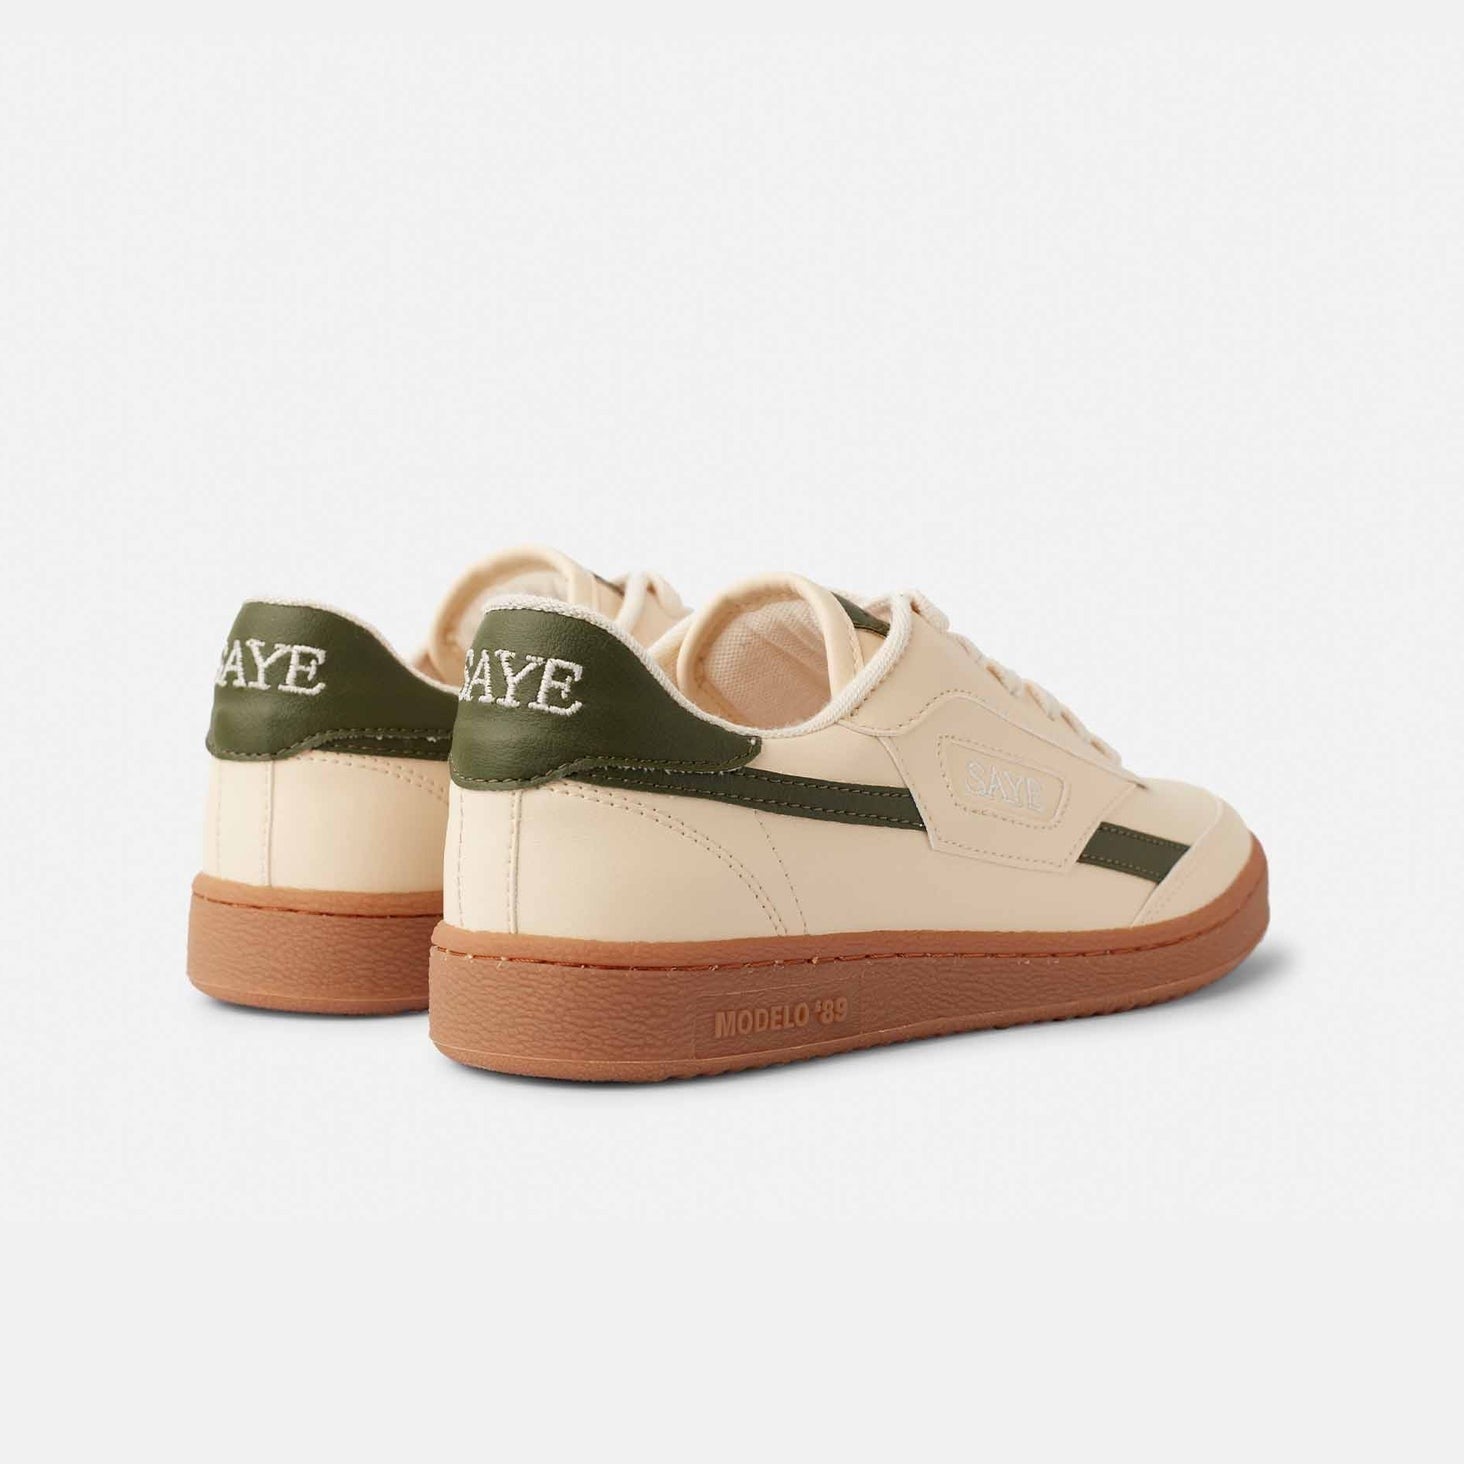 A pair of Modelo '89 Sneakers - Cactus from the SAYE Greens Capsule collection.